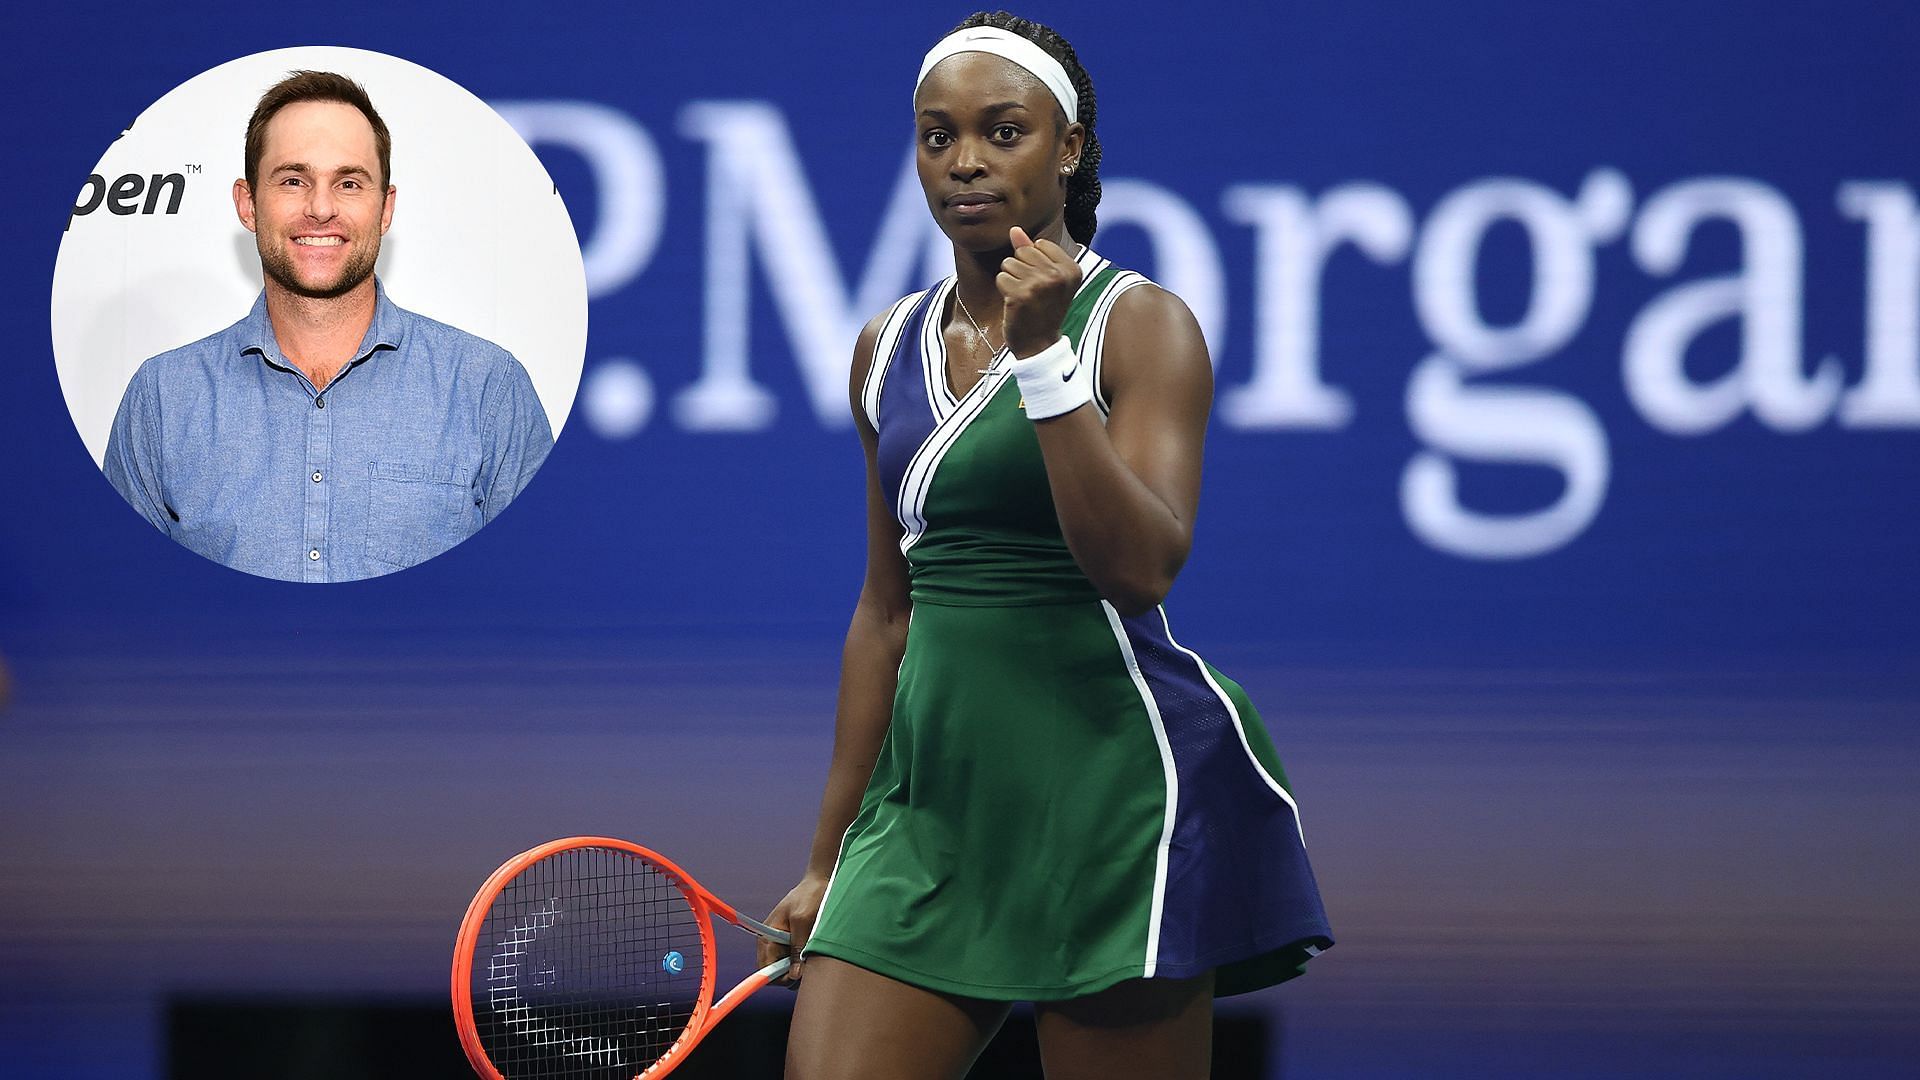 Andy Roddick lauds Sloane Stephens after her Italian Open 1R victory